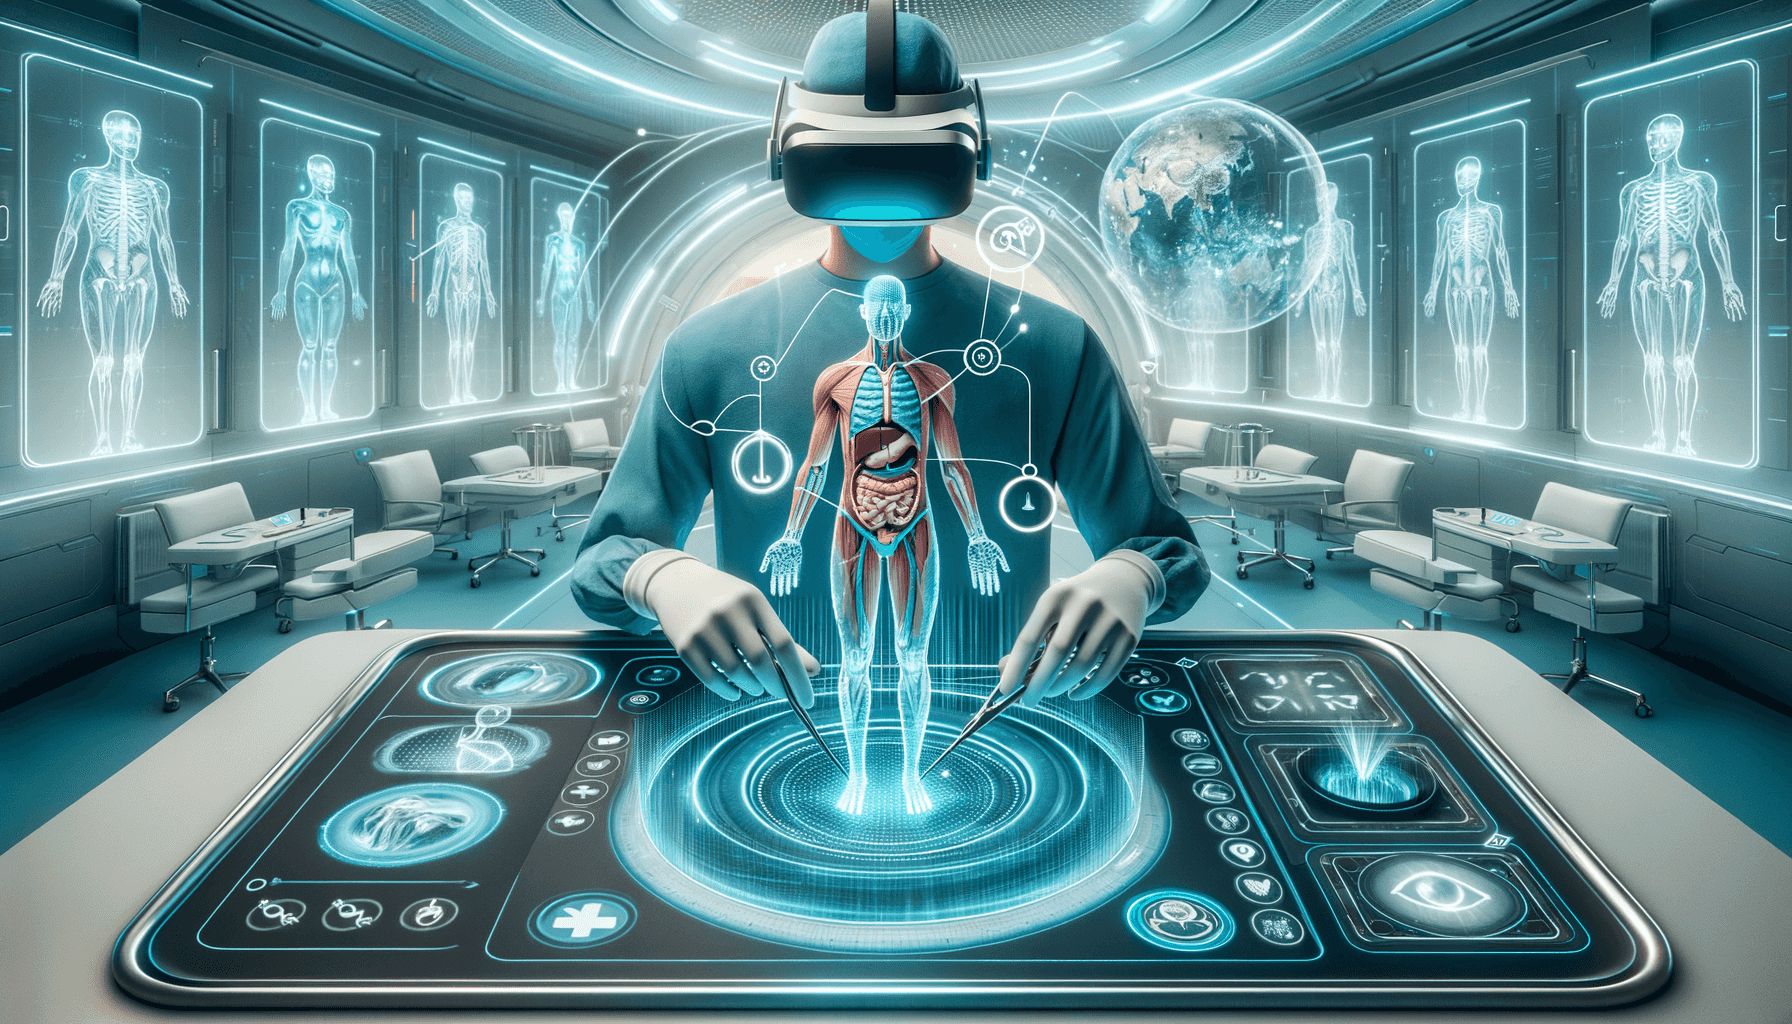 "Surgical Precision Elevated: Gravity Jack's VR Technology Revolutionizing Medical Training – Immerse in the Future 🩺💻 #VirtualReality #MedicalEducation #Innovation"